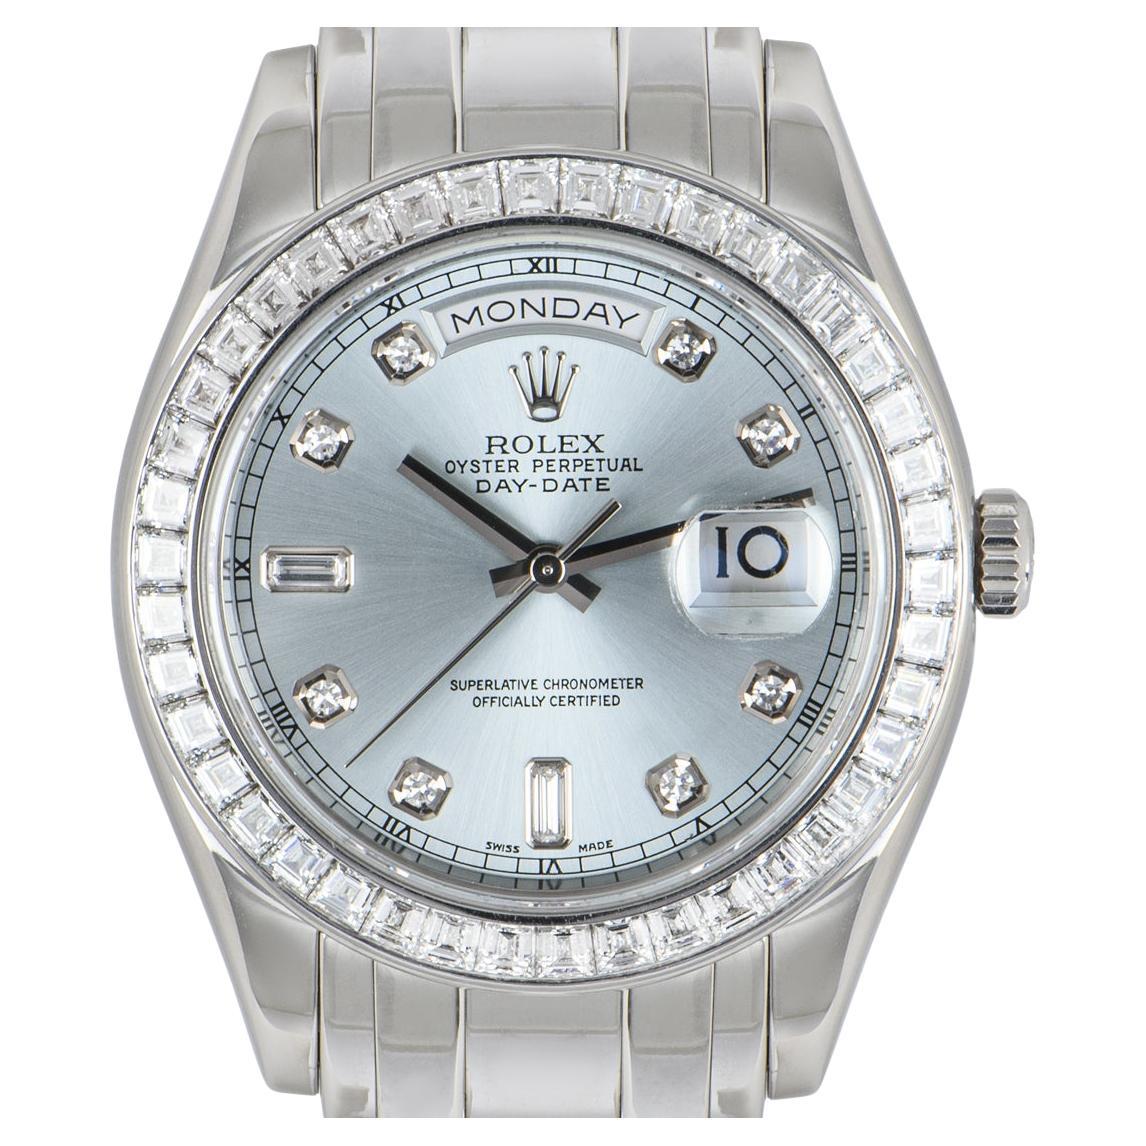 A men's Day-Date Masterpiece, in platinum by Rolex. Featuring a distinctive ice blue dial set with 8 single cut diamonds and 2 baguette diamond hour markers. Complementing the dial is a platinum bezel set with 42 tapered baguette diamonds.

Powered